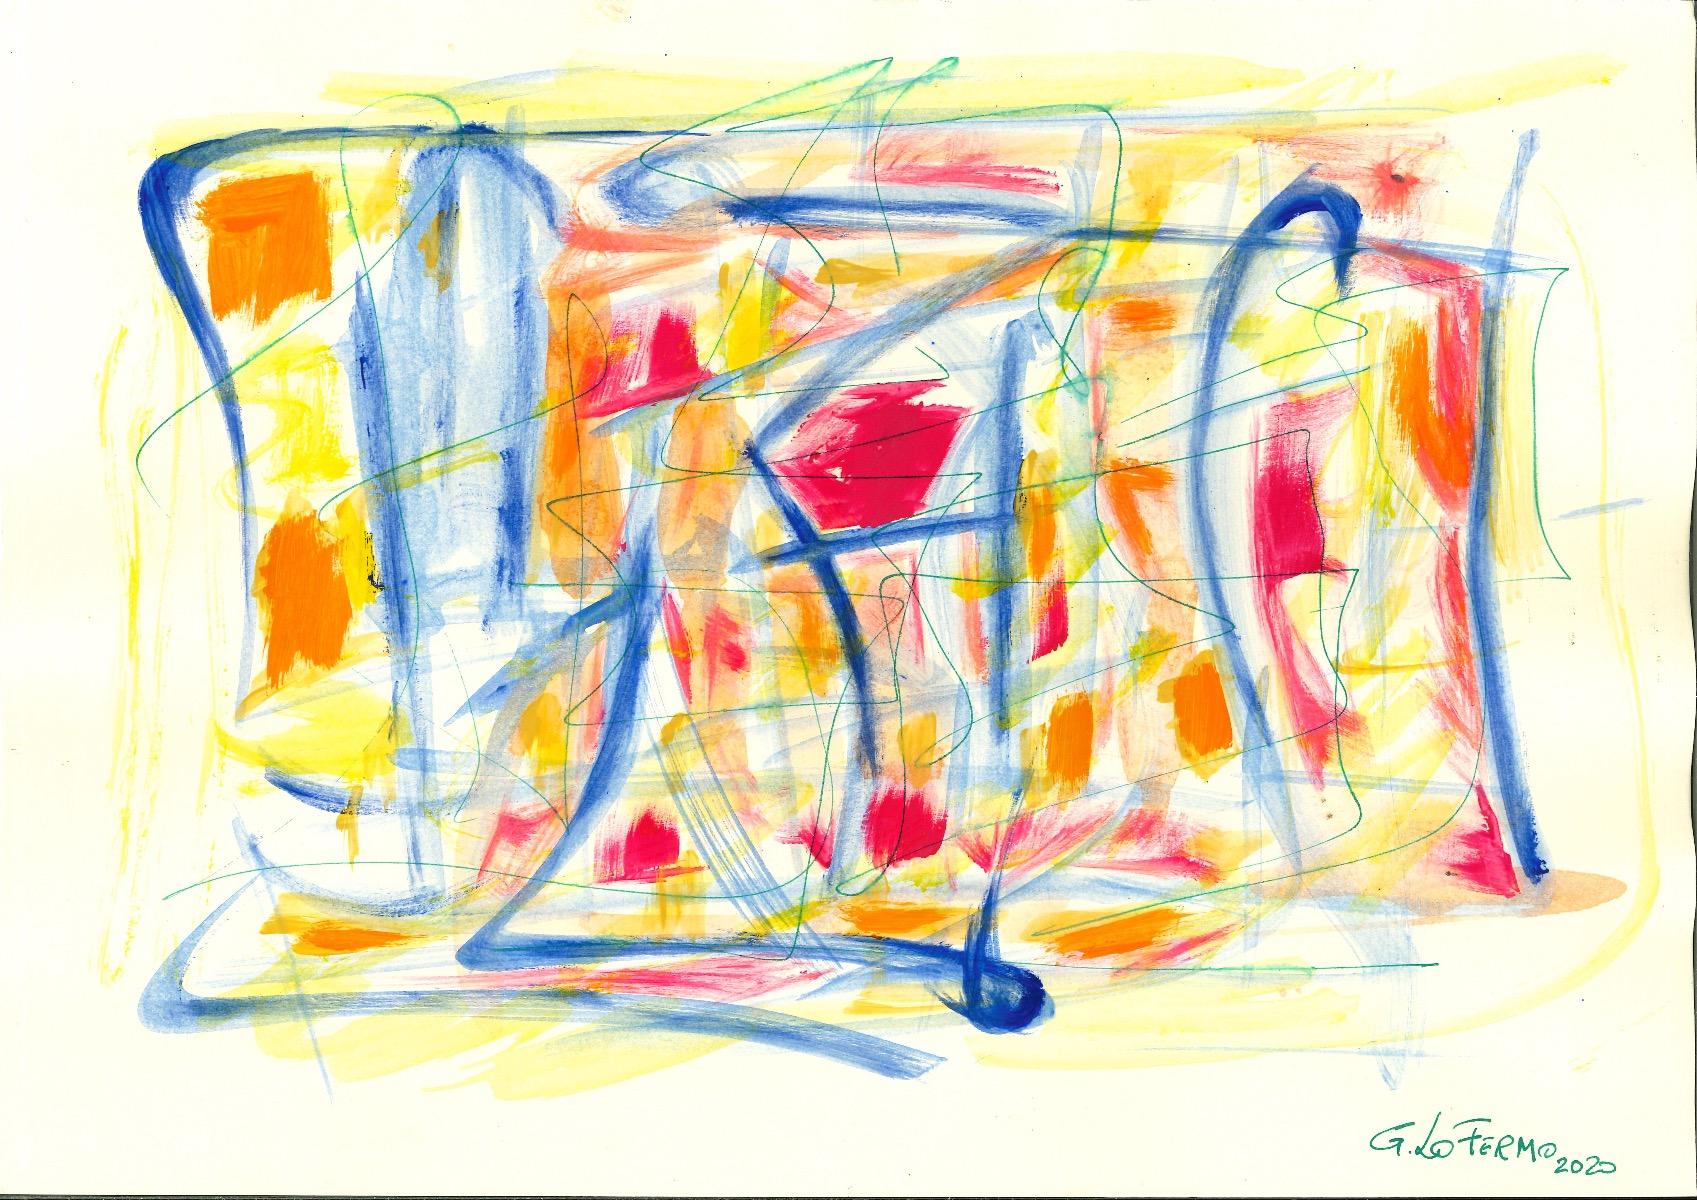 Colored Composition is an original artwork realized by Giorgio Lo Fermo (b. 1947) in 2020.

Tempera and Watercolor on Paper.

Hand-signed and dated by the artist on the lower right

Perfect conditions.

Giorgio Lo Fermo is an Italian painter and